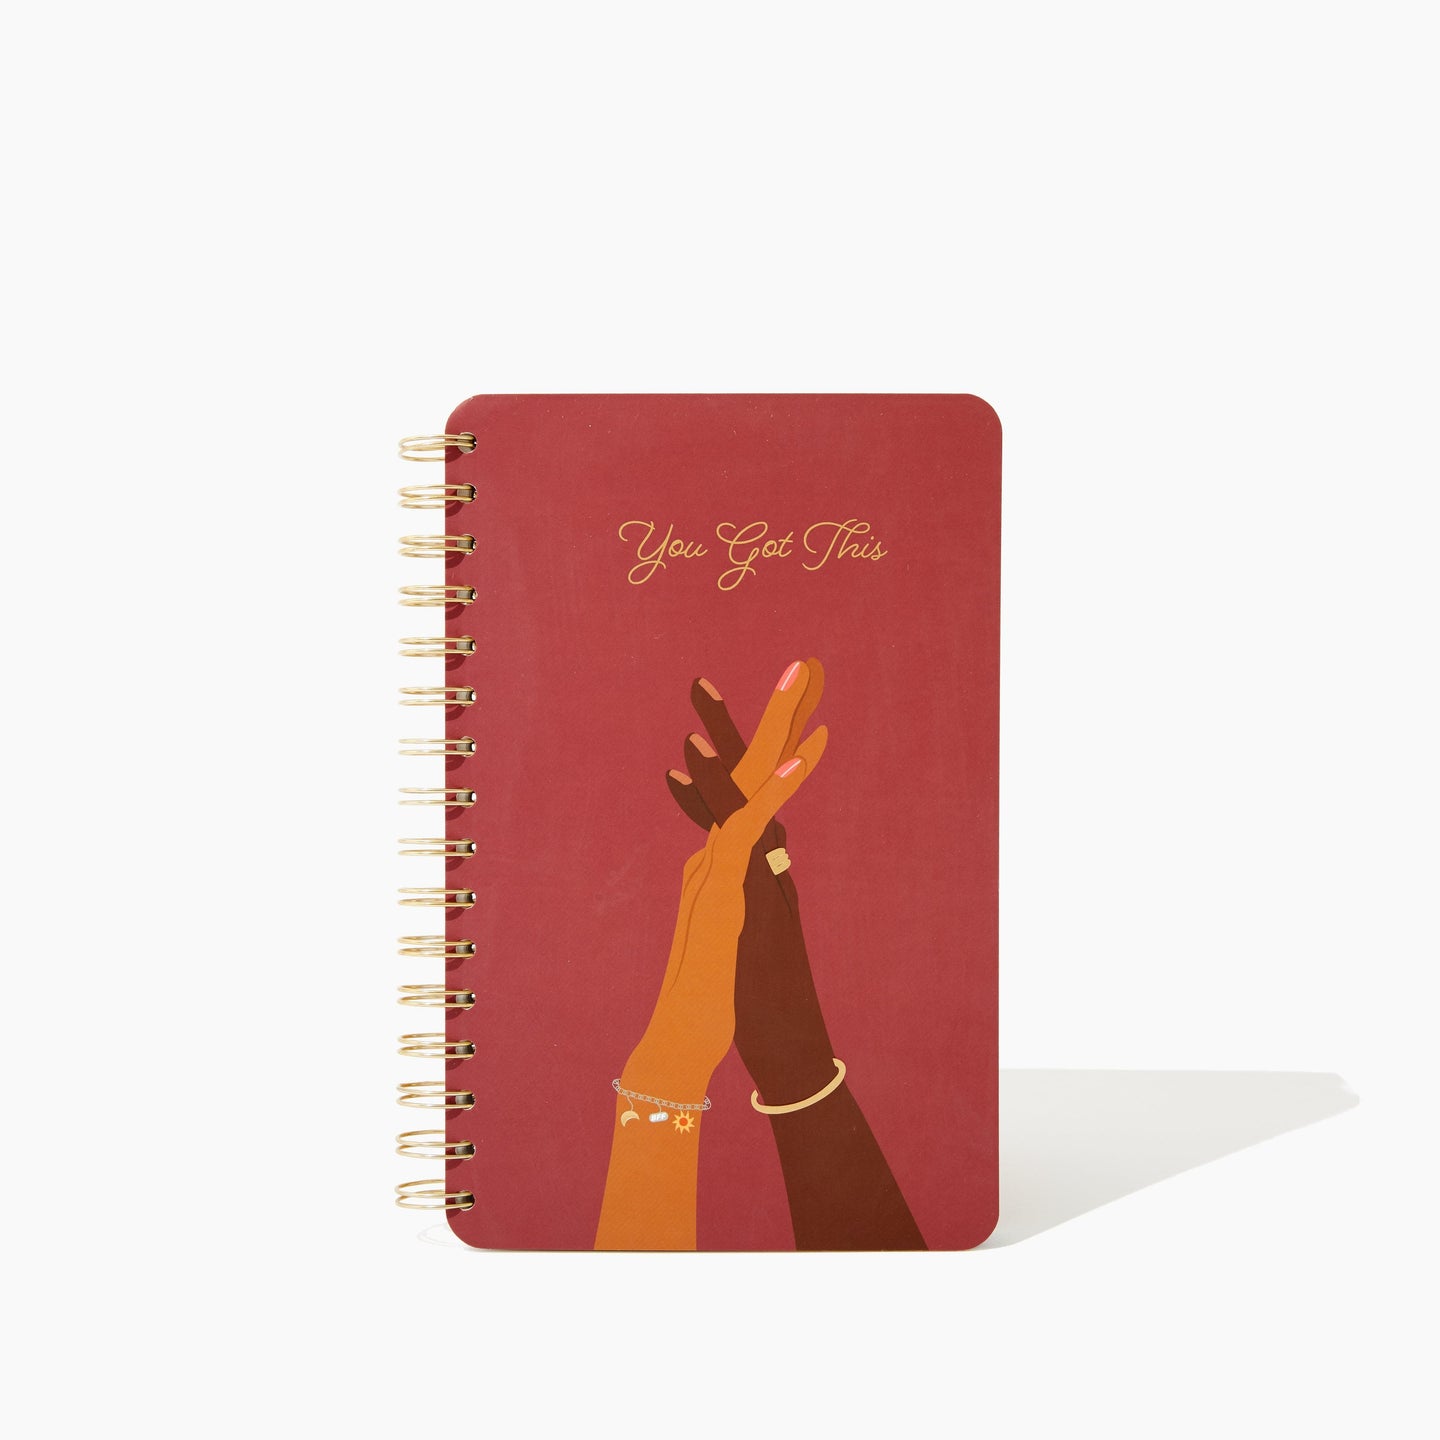 Trust the Process Enjoy the Journey: Blank Lined Journal